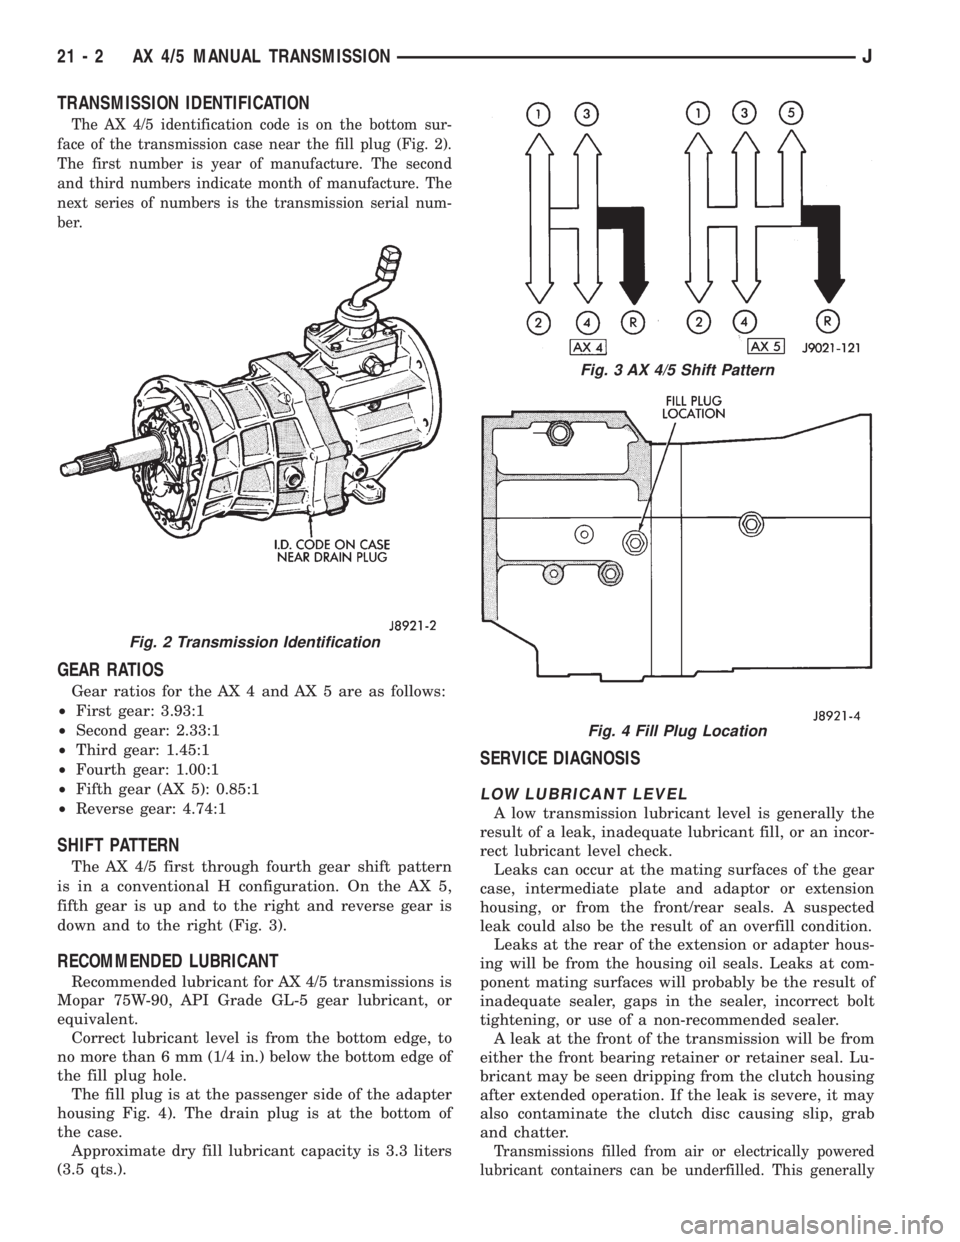 JEEP XJ 1995  Service And Repair Manual TRANSMISSION IDENTIFICATION
The AX 4/5 identification code is on the bottom sur-
face of the transmission case near the fill plug (Fig. 2).
The first number is year of manufacture. The second
and thir